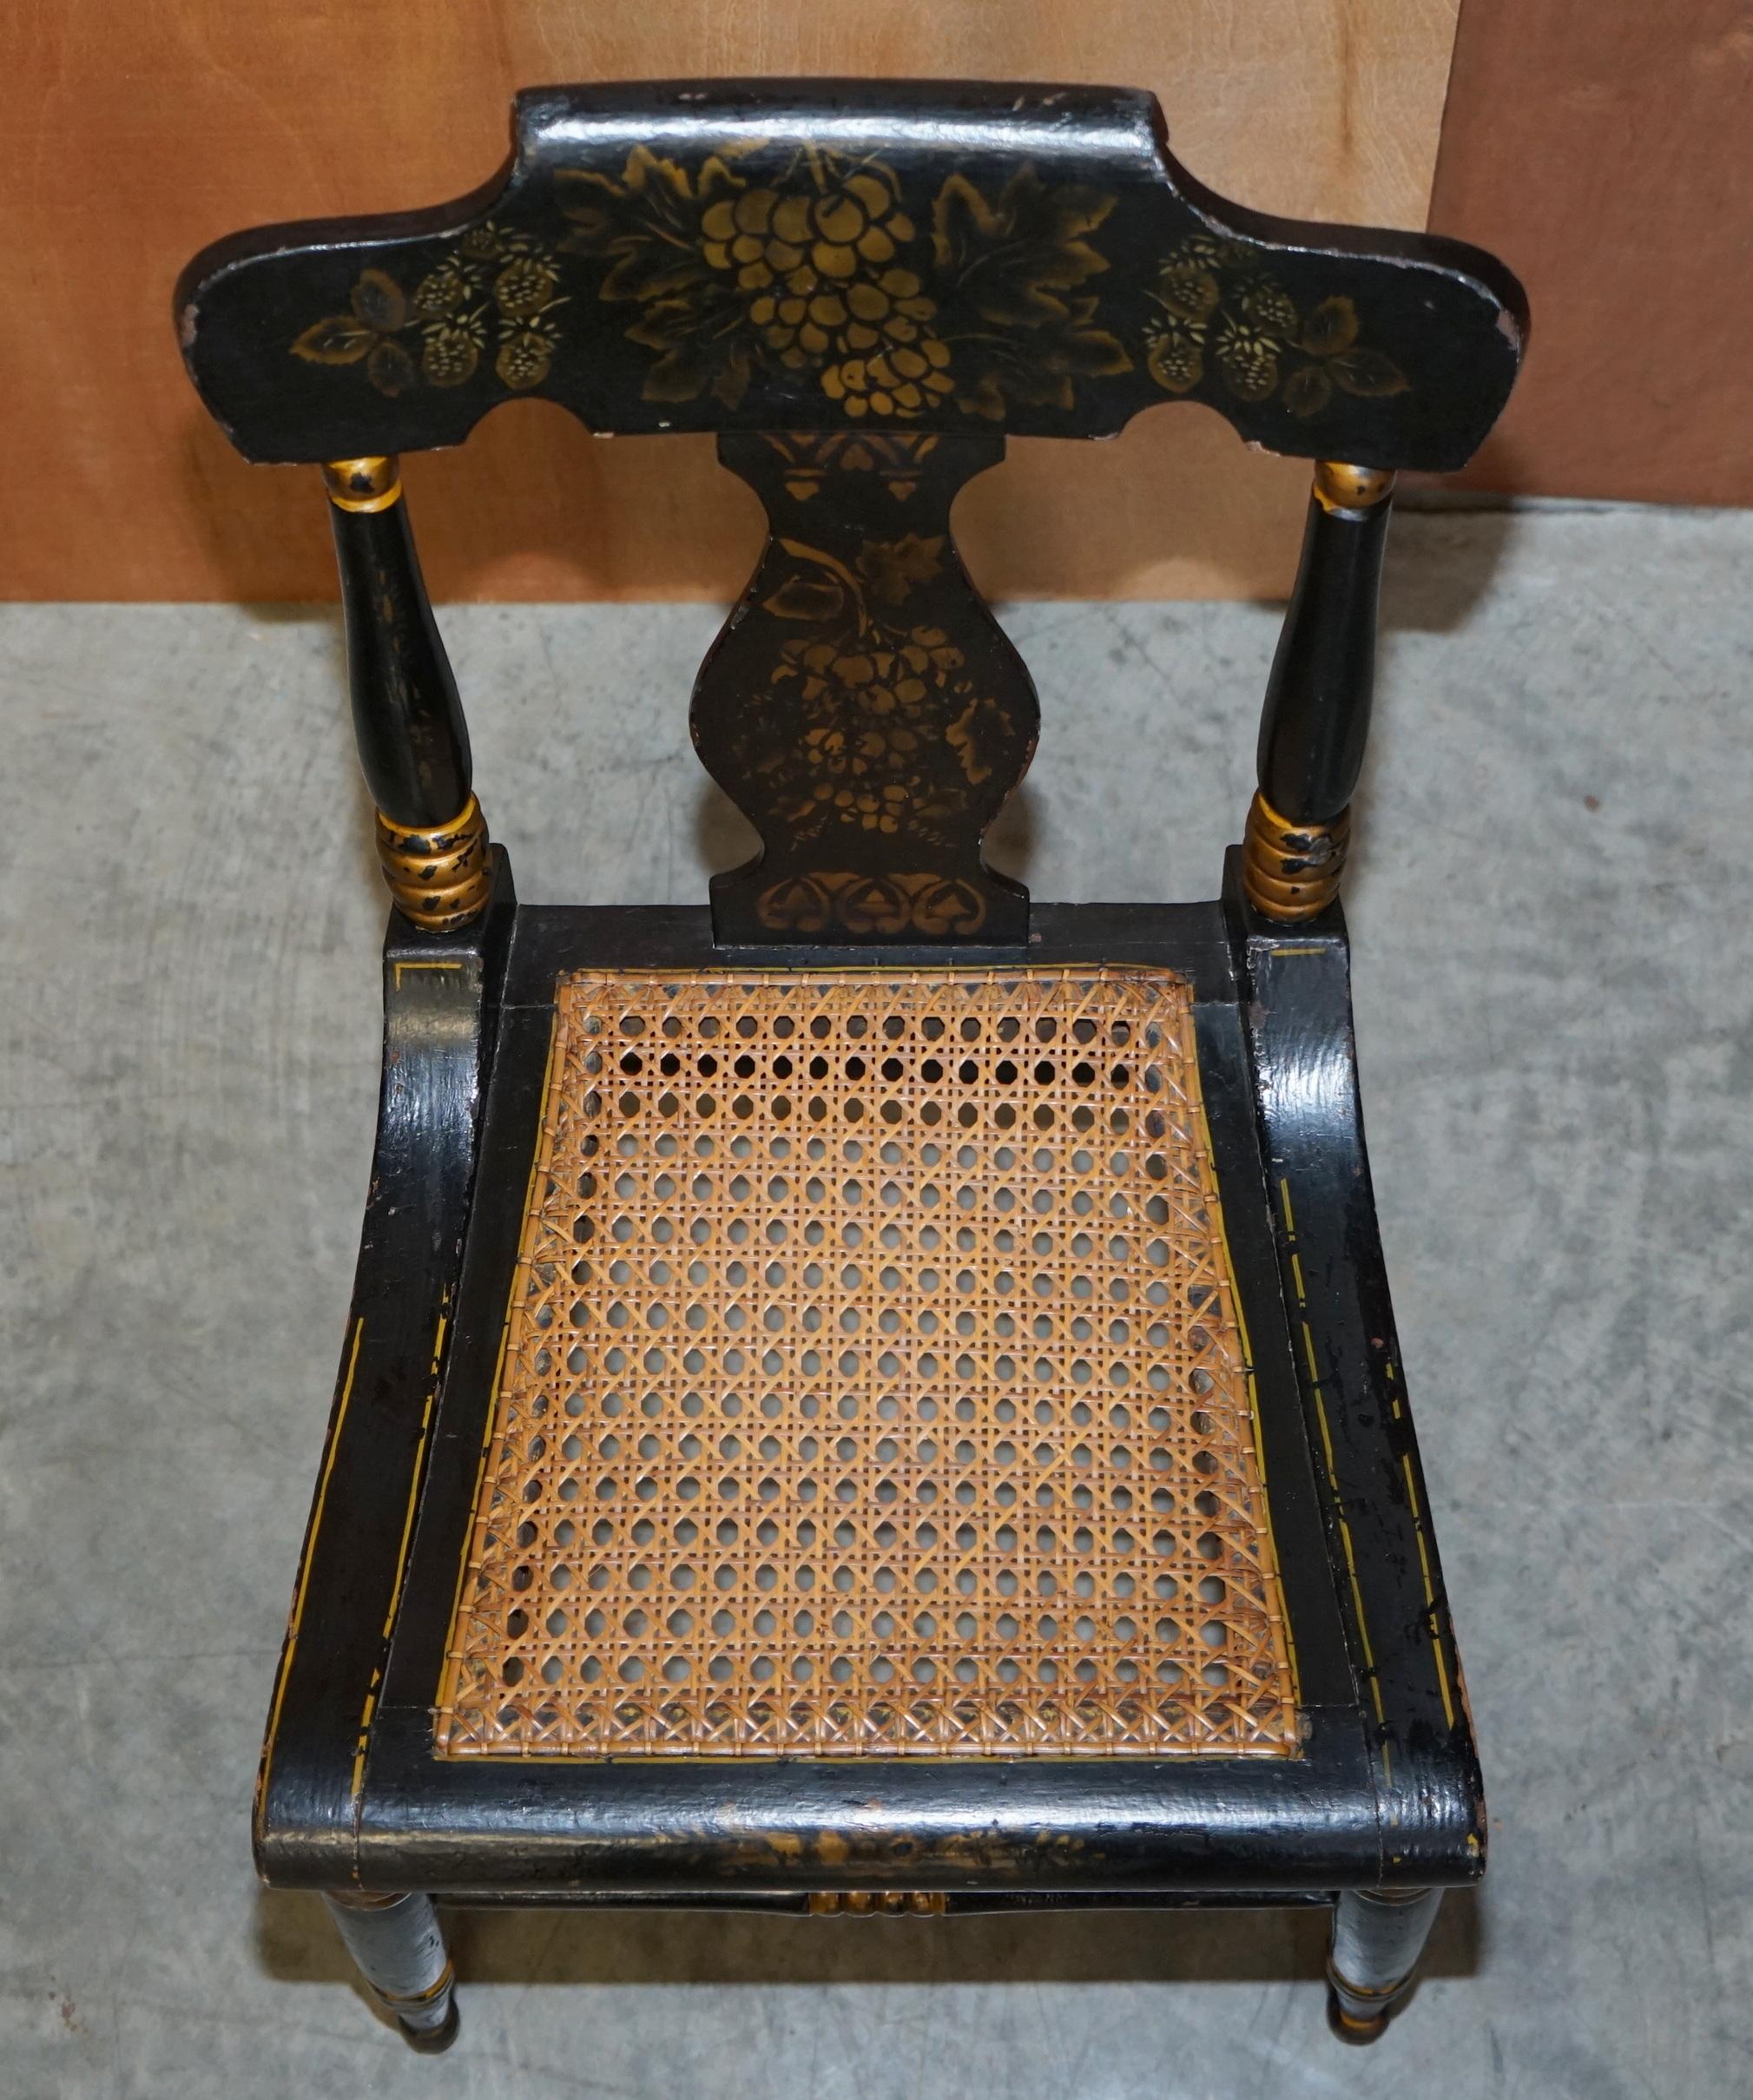 We are delighted to offer for sale this stunning original circa 1825 Ebonised and gold gilt hand painted Baltimore side chair

A highly collectable and well made side chair, if you are looking at this listing then chances are you know how rare and